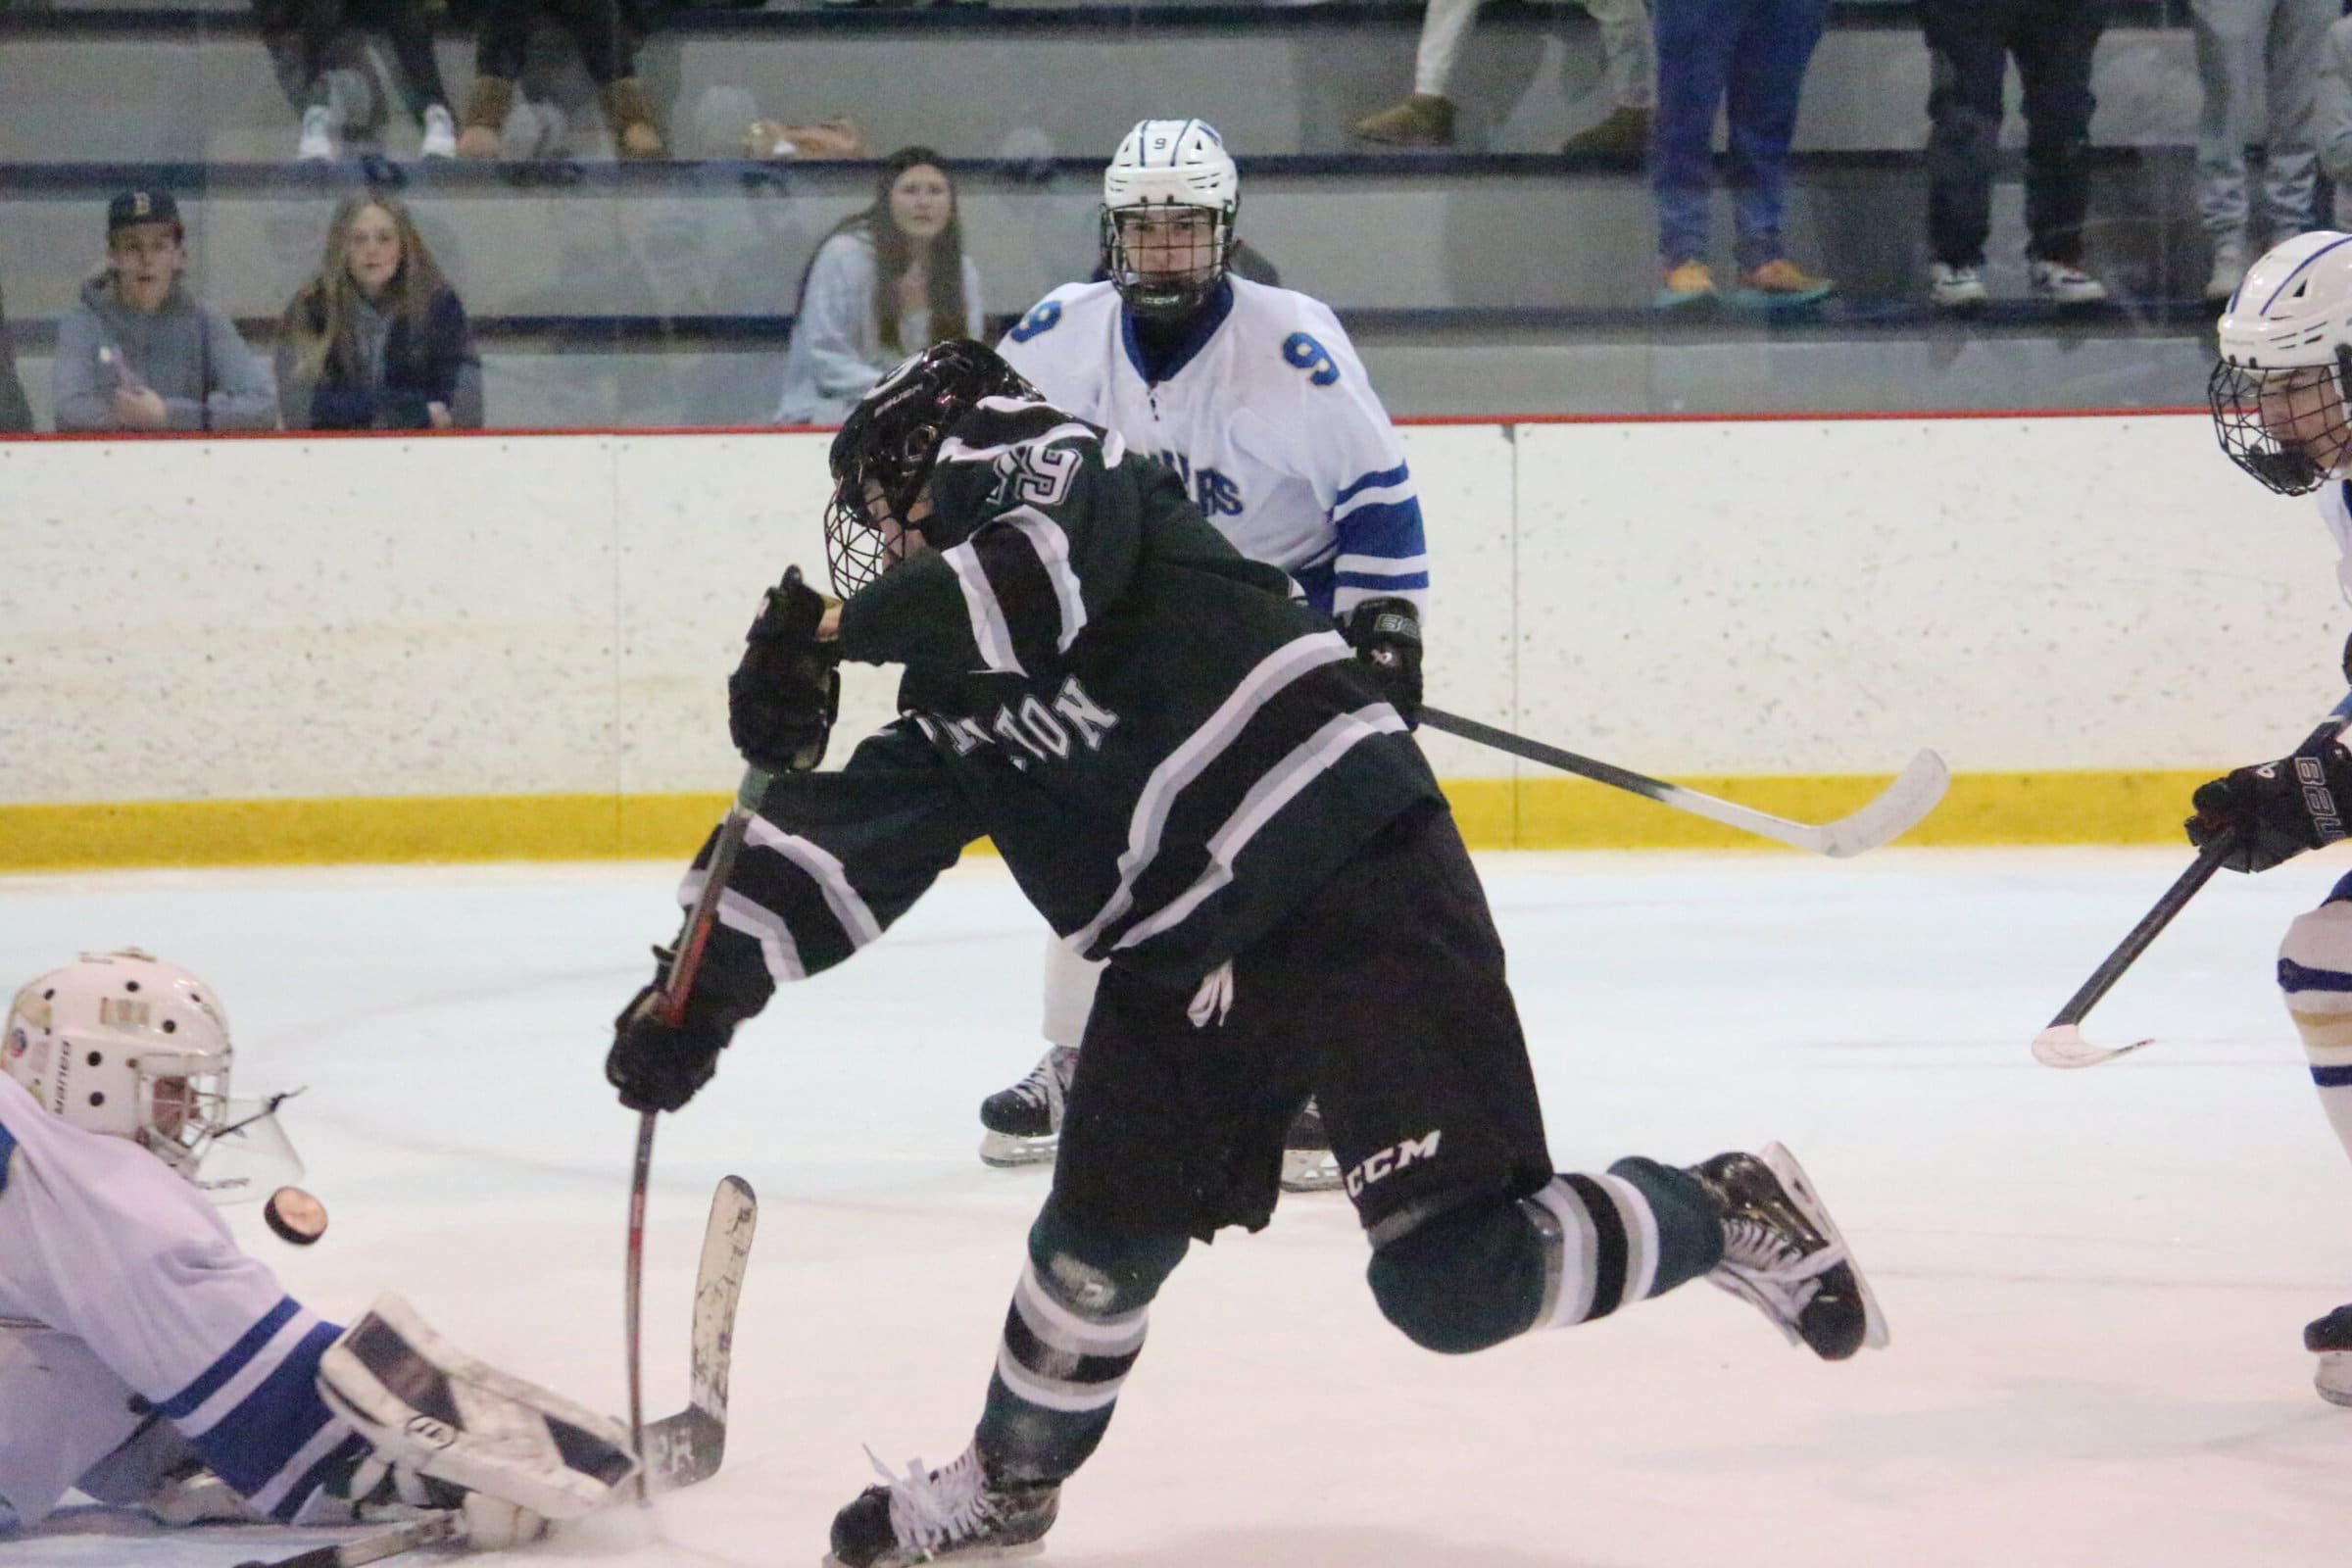 Grafton’s hockey title hopes dashed by Norwell in semifinals